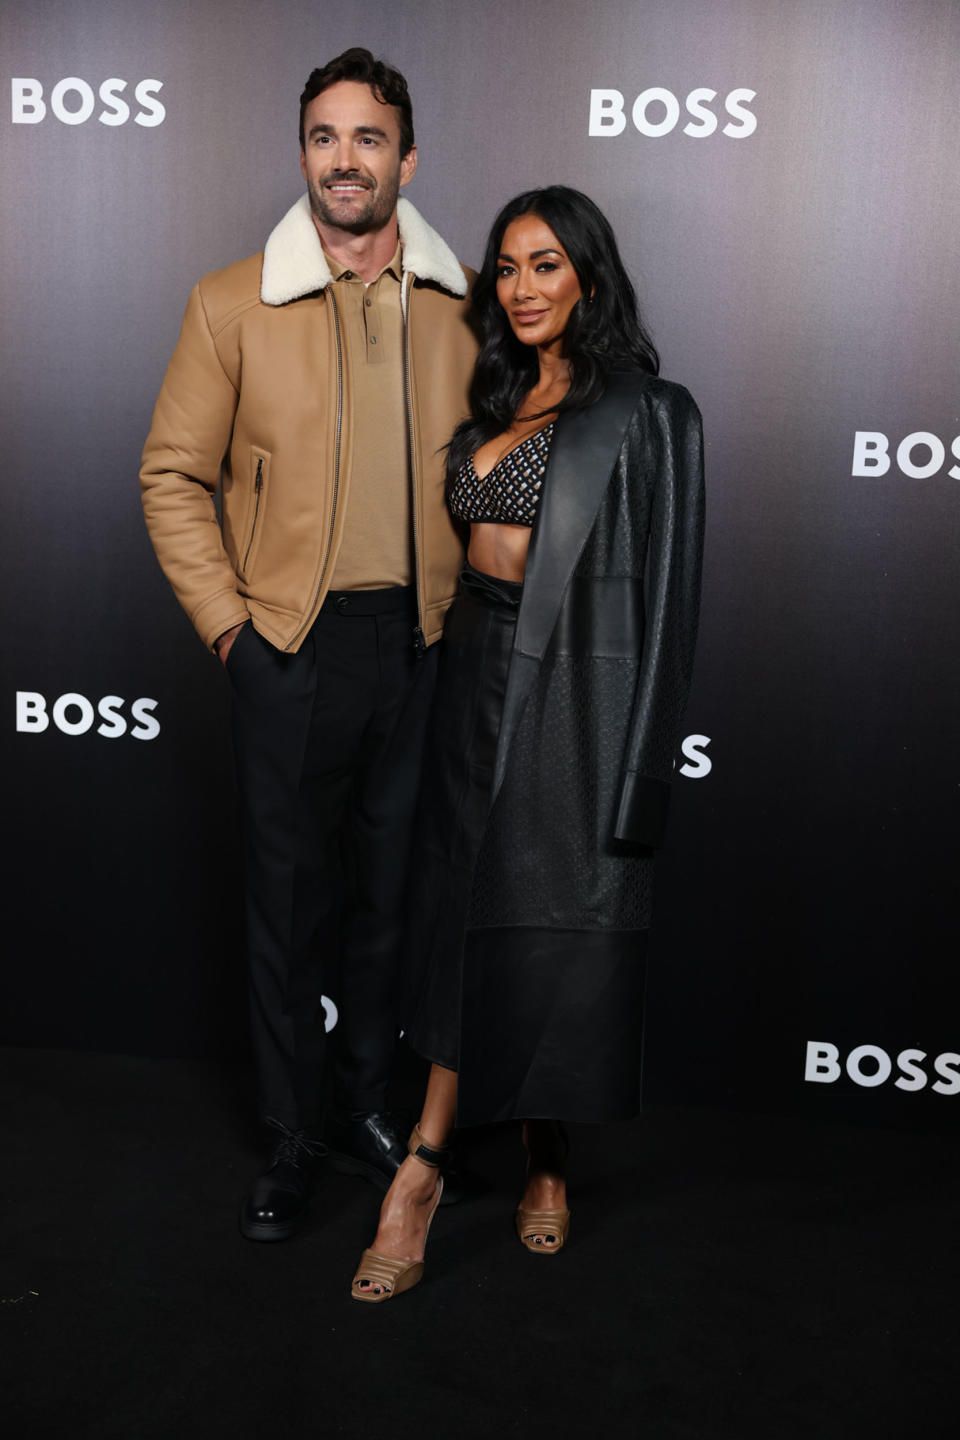 Thom Evans and Nicole Scherzinger are seen arriving at the Boss Fashion Show during the Milan Fashion Week Womenswear Spring/Summer 2023 on September 22, 2022 in Milan, Italy.  (Stefania D'Alessandro / WireImage)